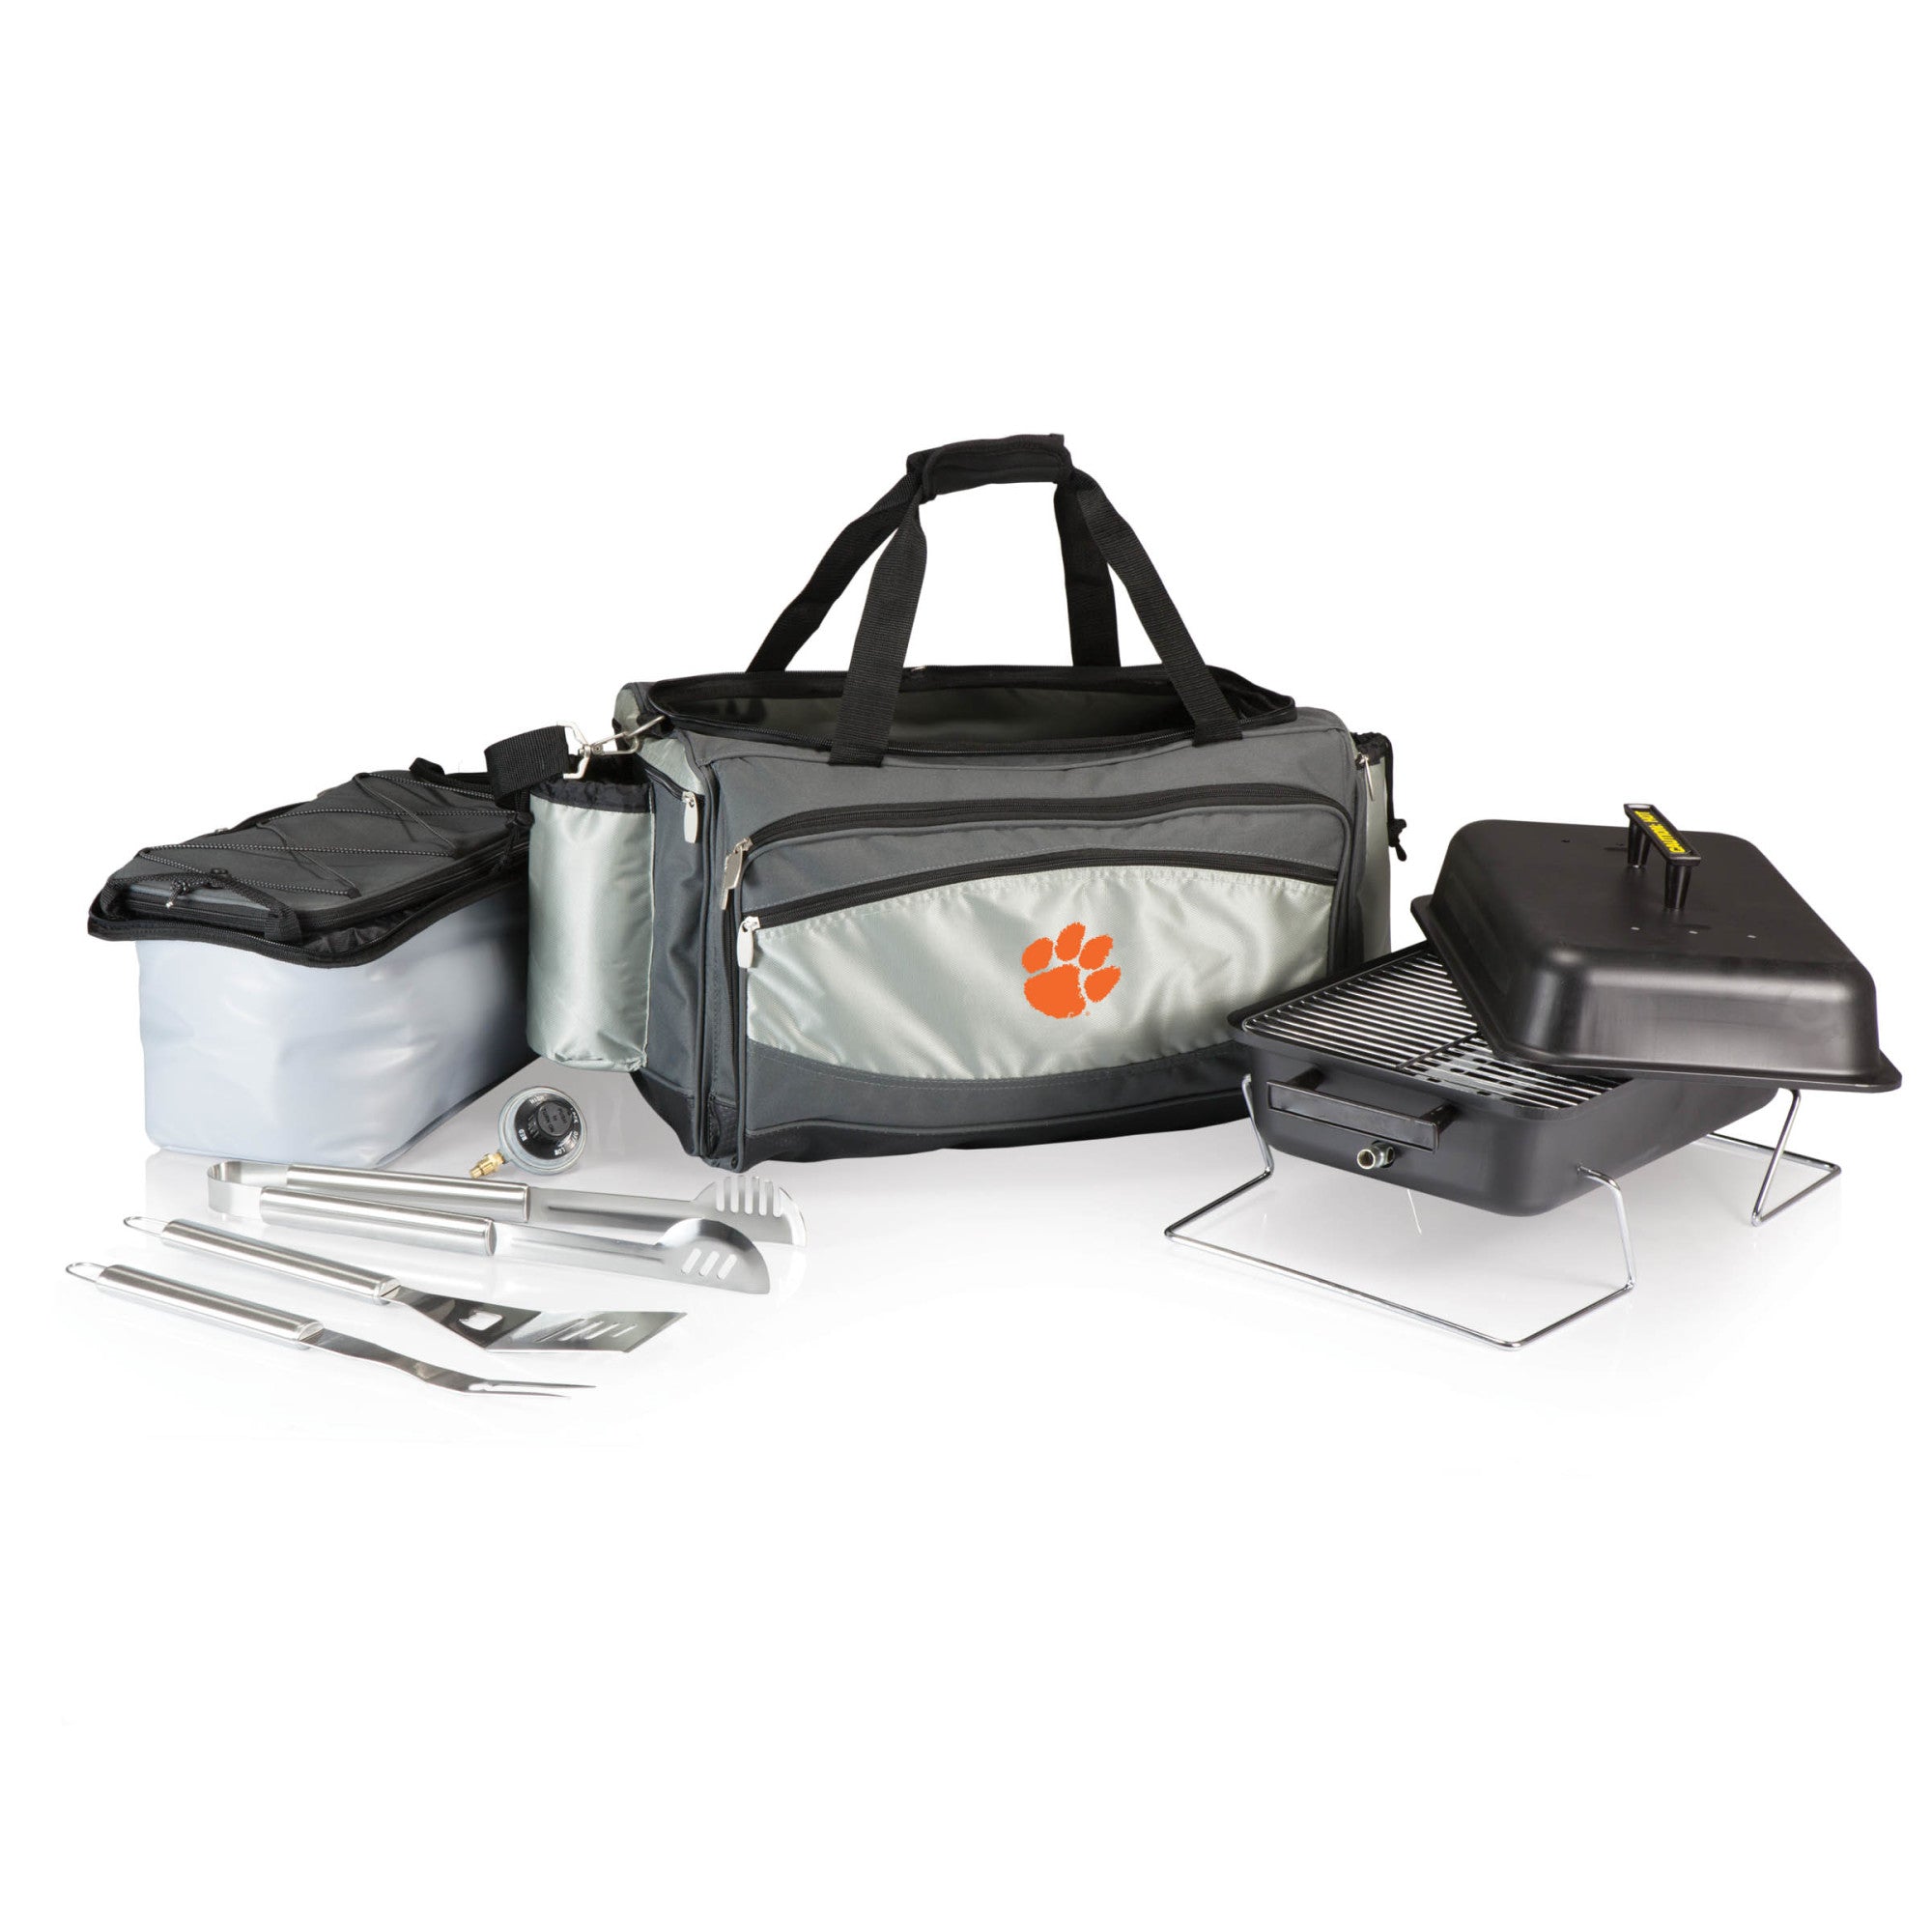 Clemson Tigers - Vulcan Portable Propane Grill & Cooler Tote, (Black with Gray Accents)